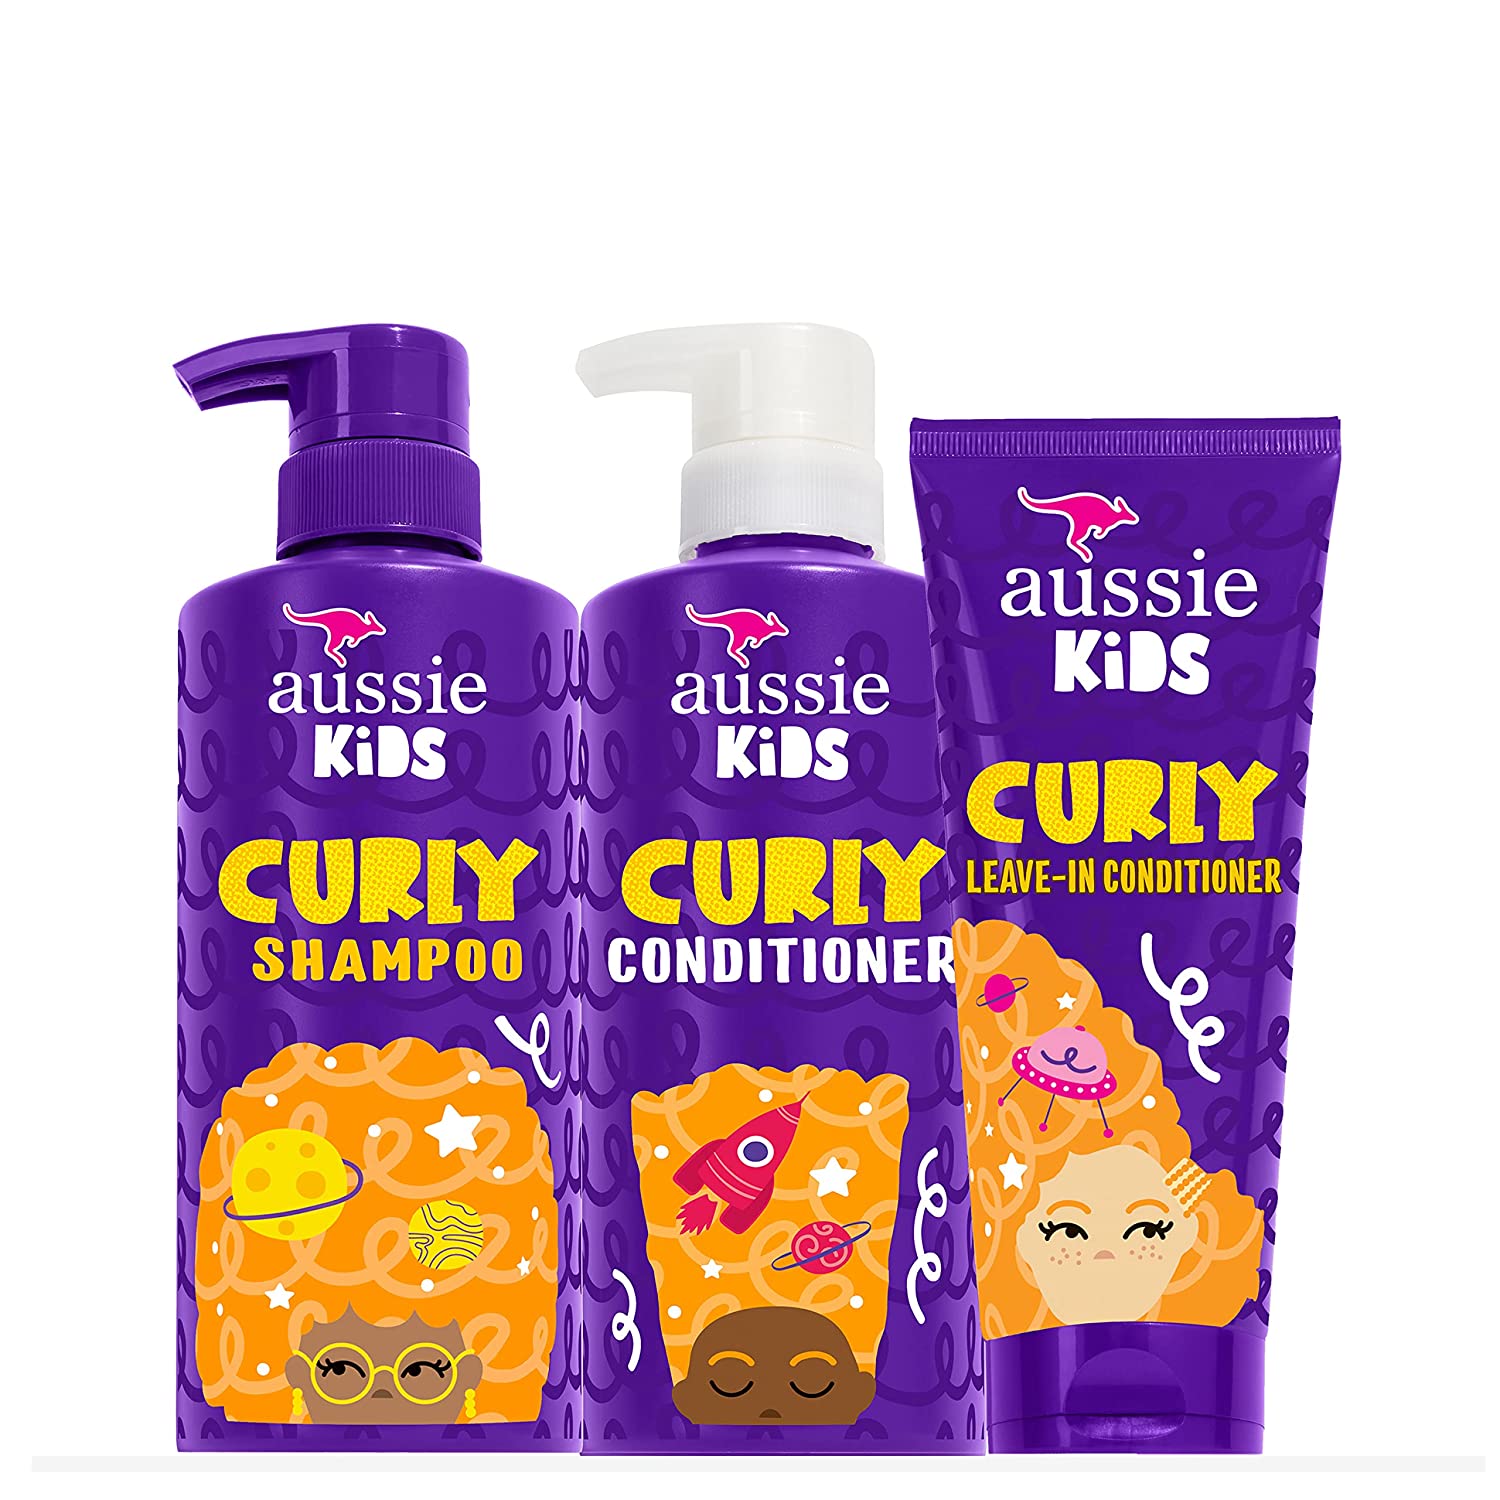 Aussie Kids Shampoo, Conditioner, and Leave-in [...]